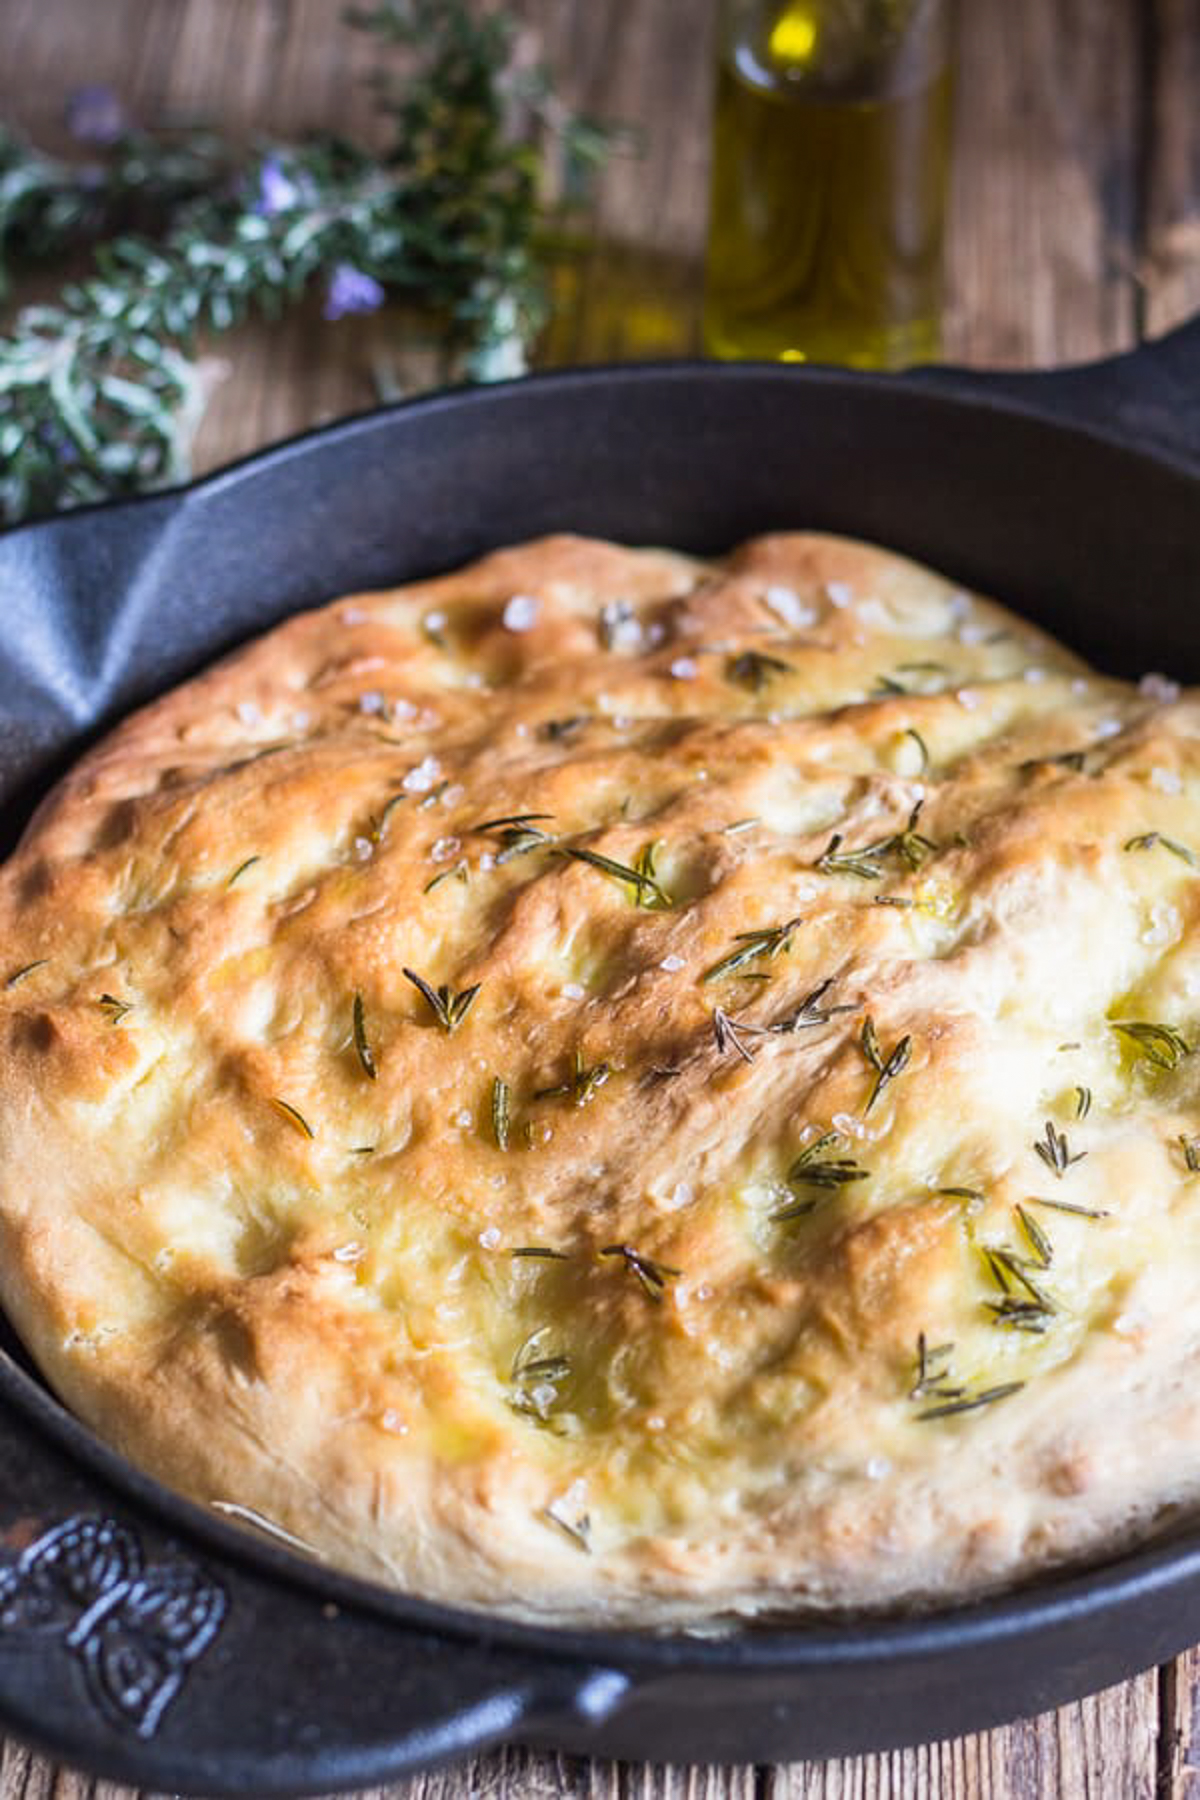 Baked focaccia in a black pan.